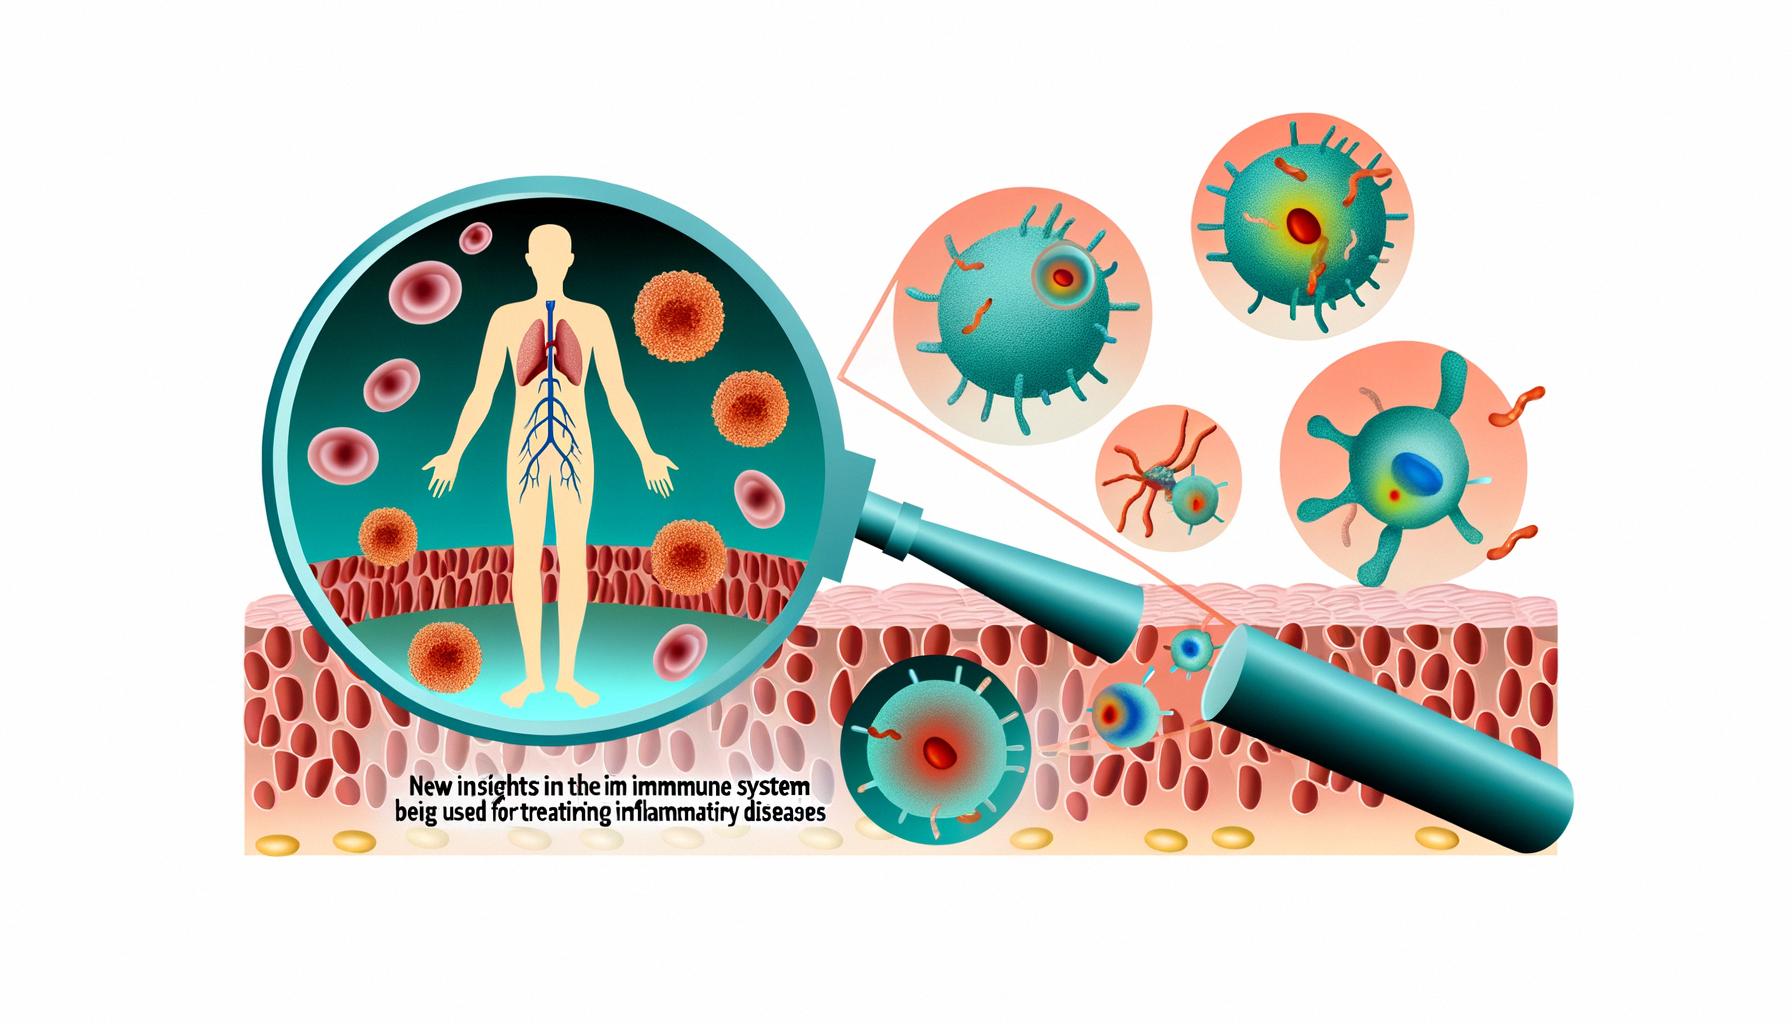 New immune system insights for treating inflammatory diseases Balanced News